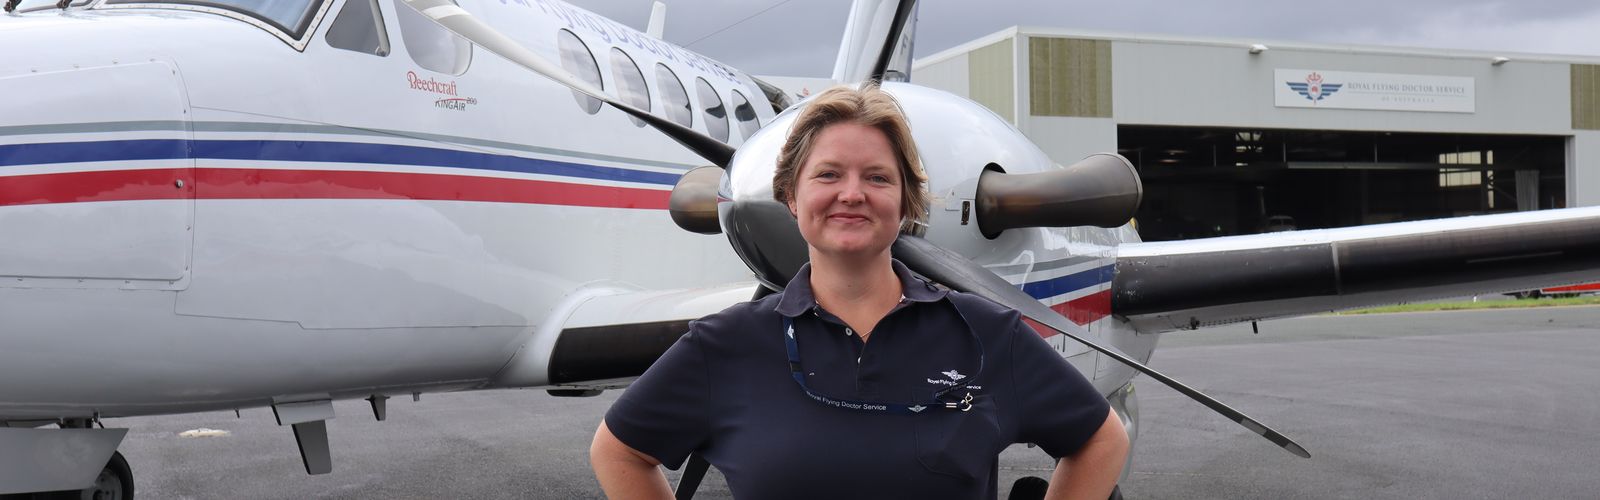 RFDS Pilot Hayley Wood with an RFDS Aircraft